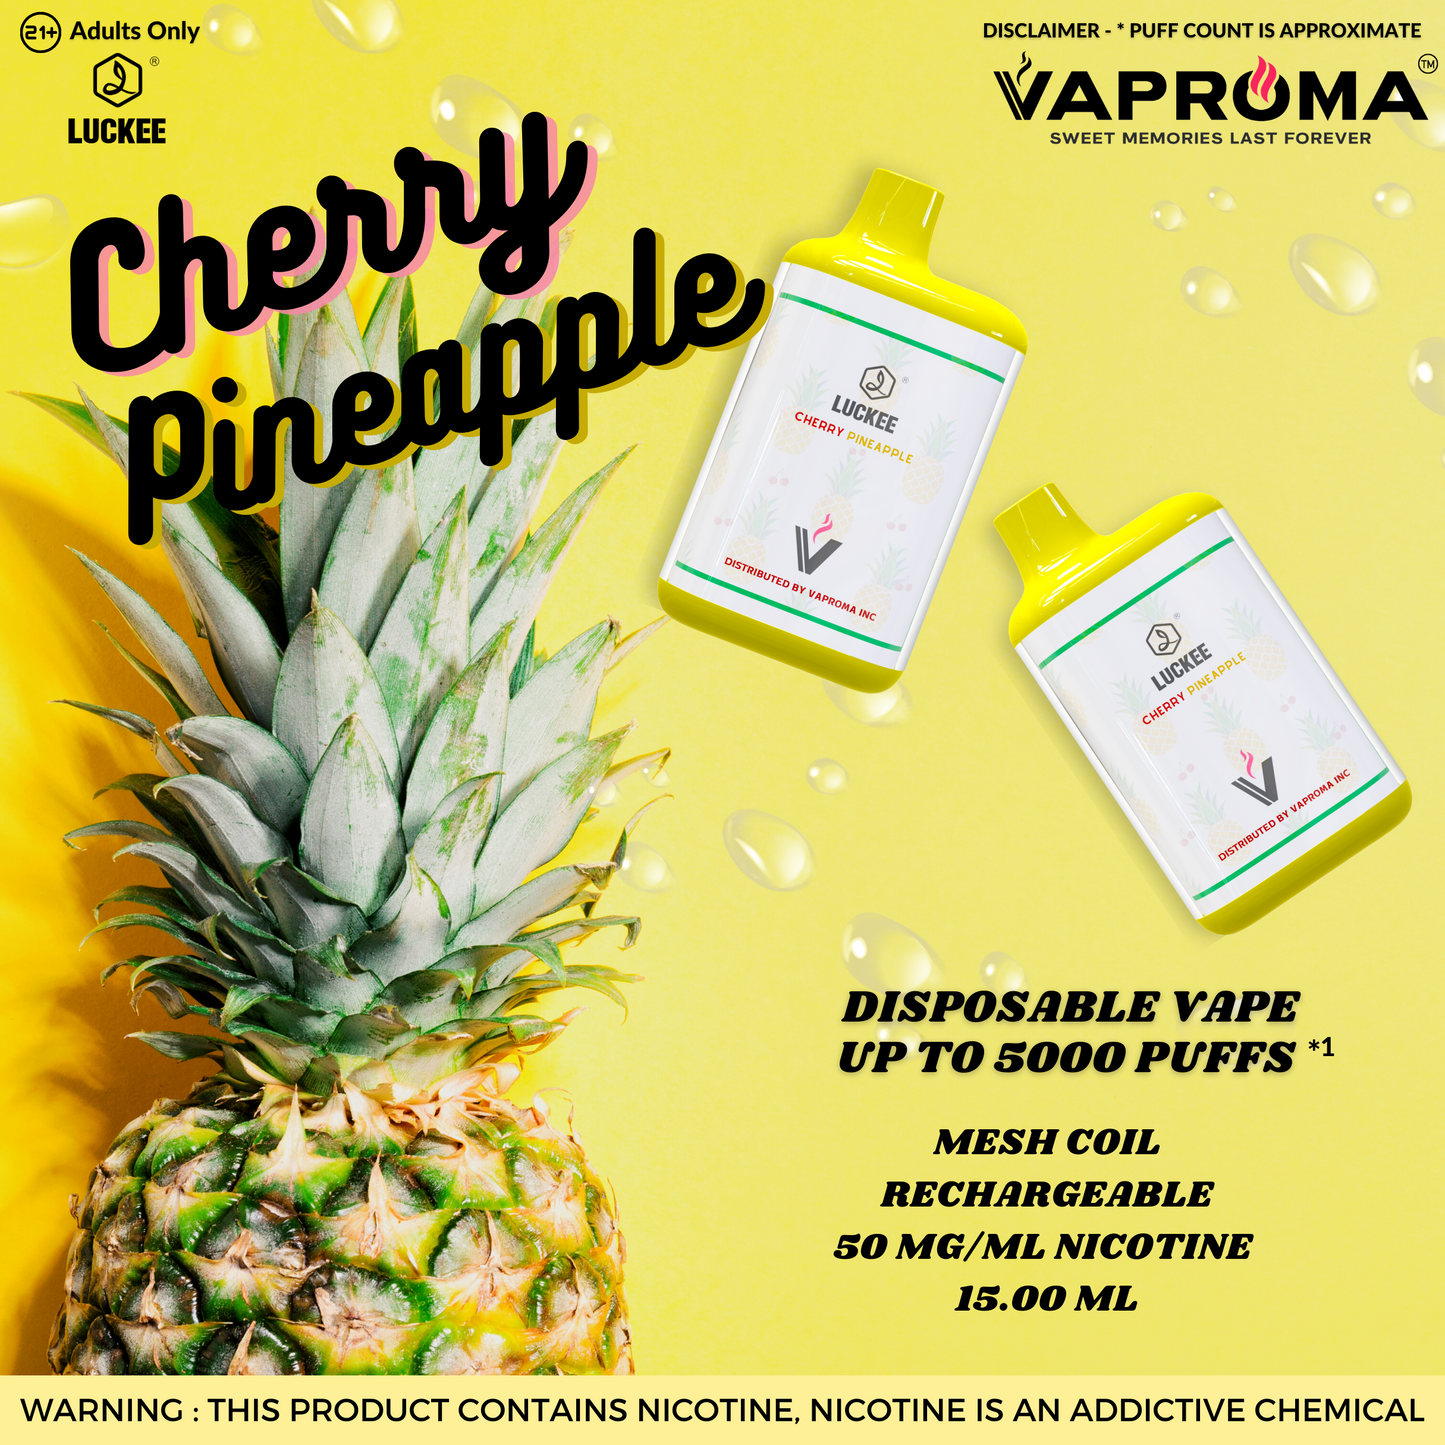 LUCKEE Lilac 5000 Disposable CHERRY PINEAPPLE